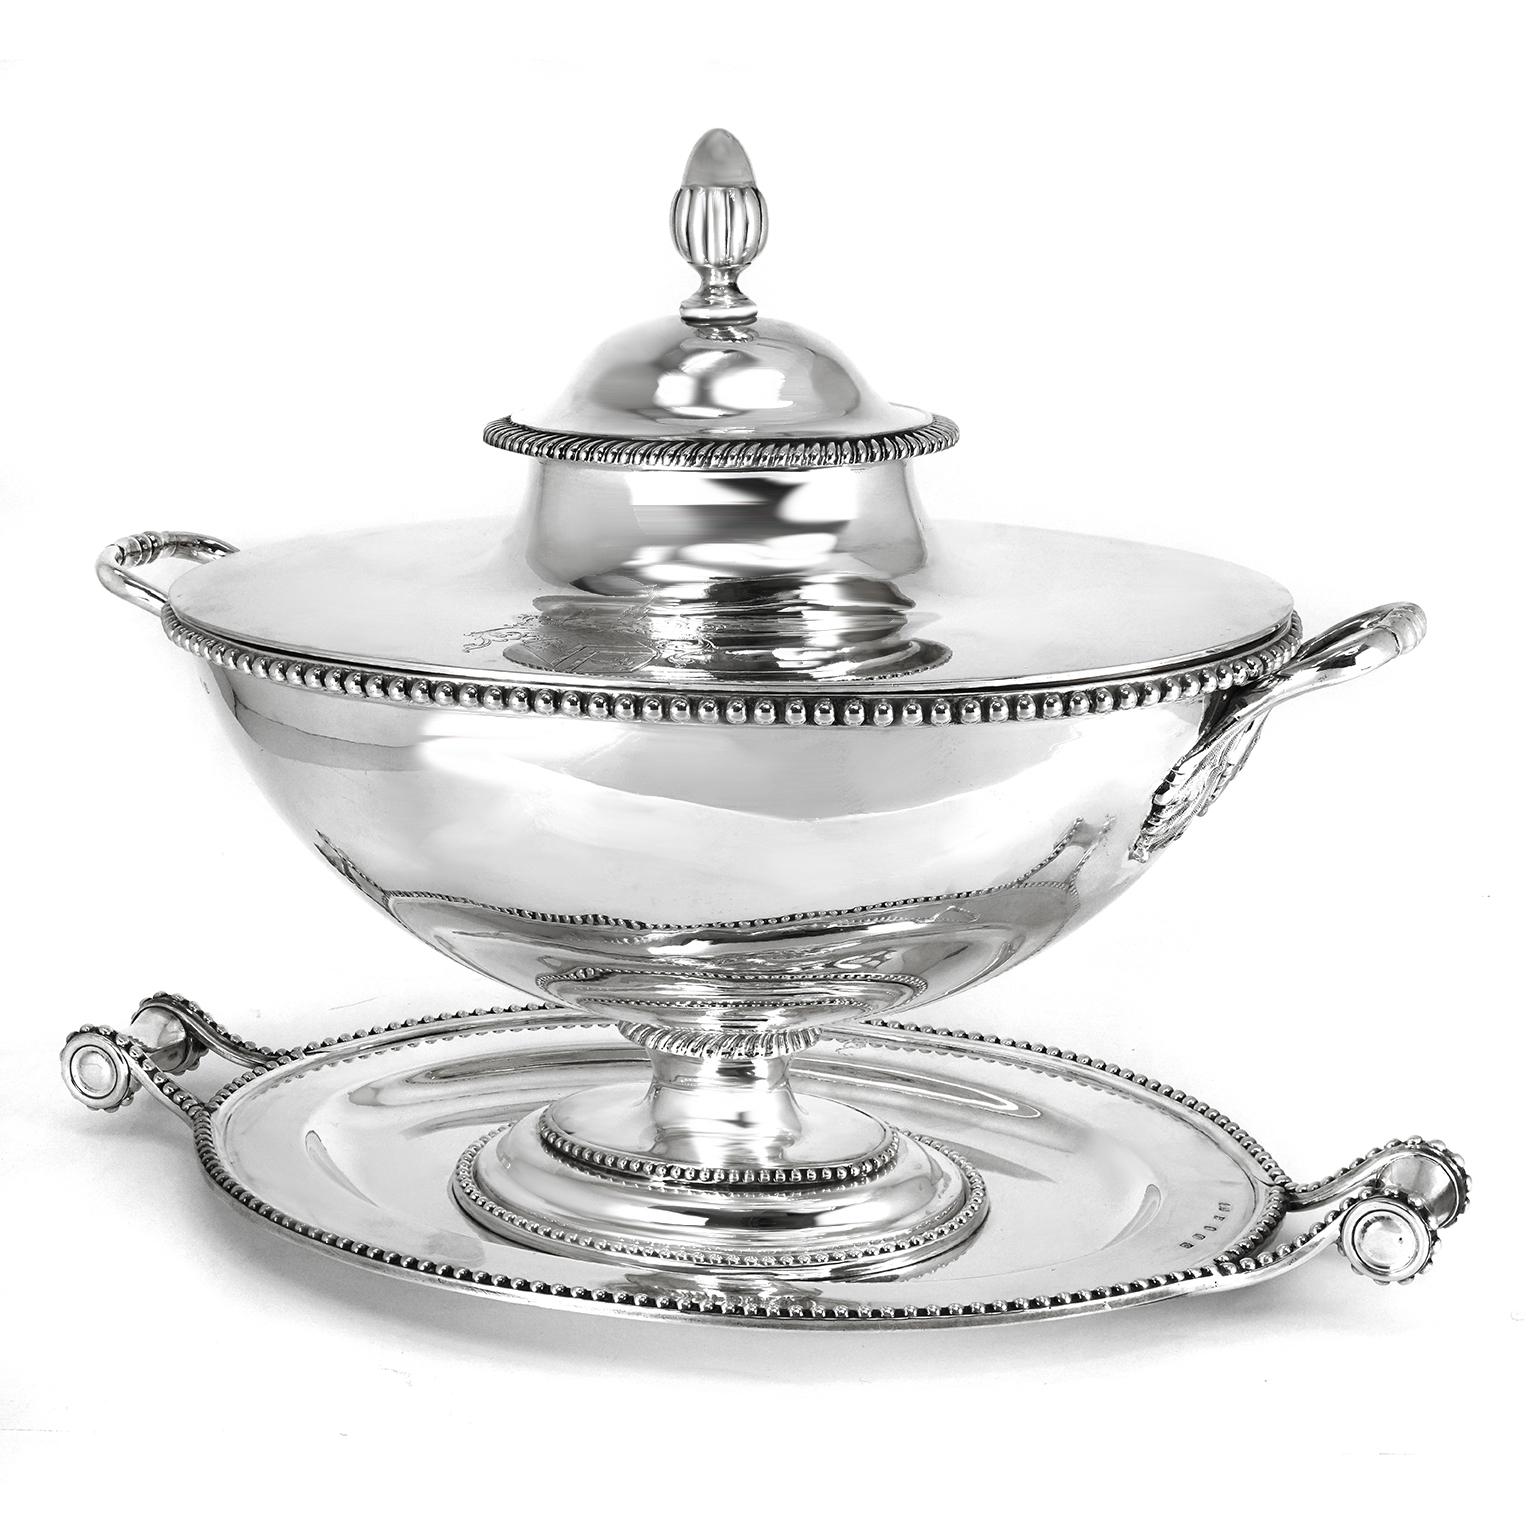 Victorian Sterling Tureen with Platter c1850 In Excellent Condition For Sale In Litchfield, CT